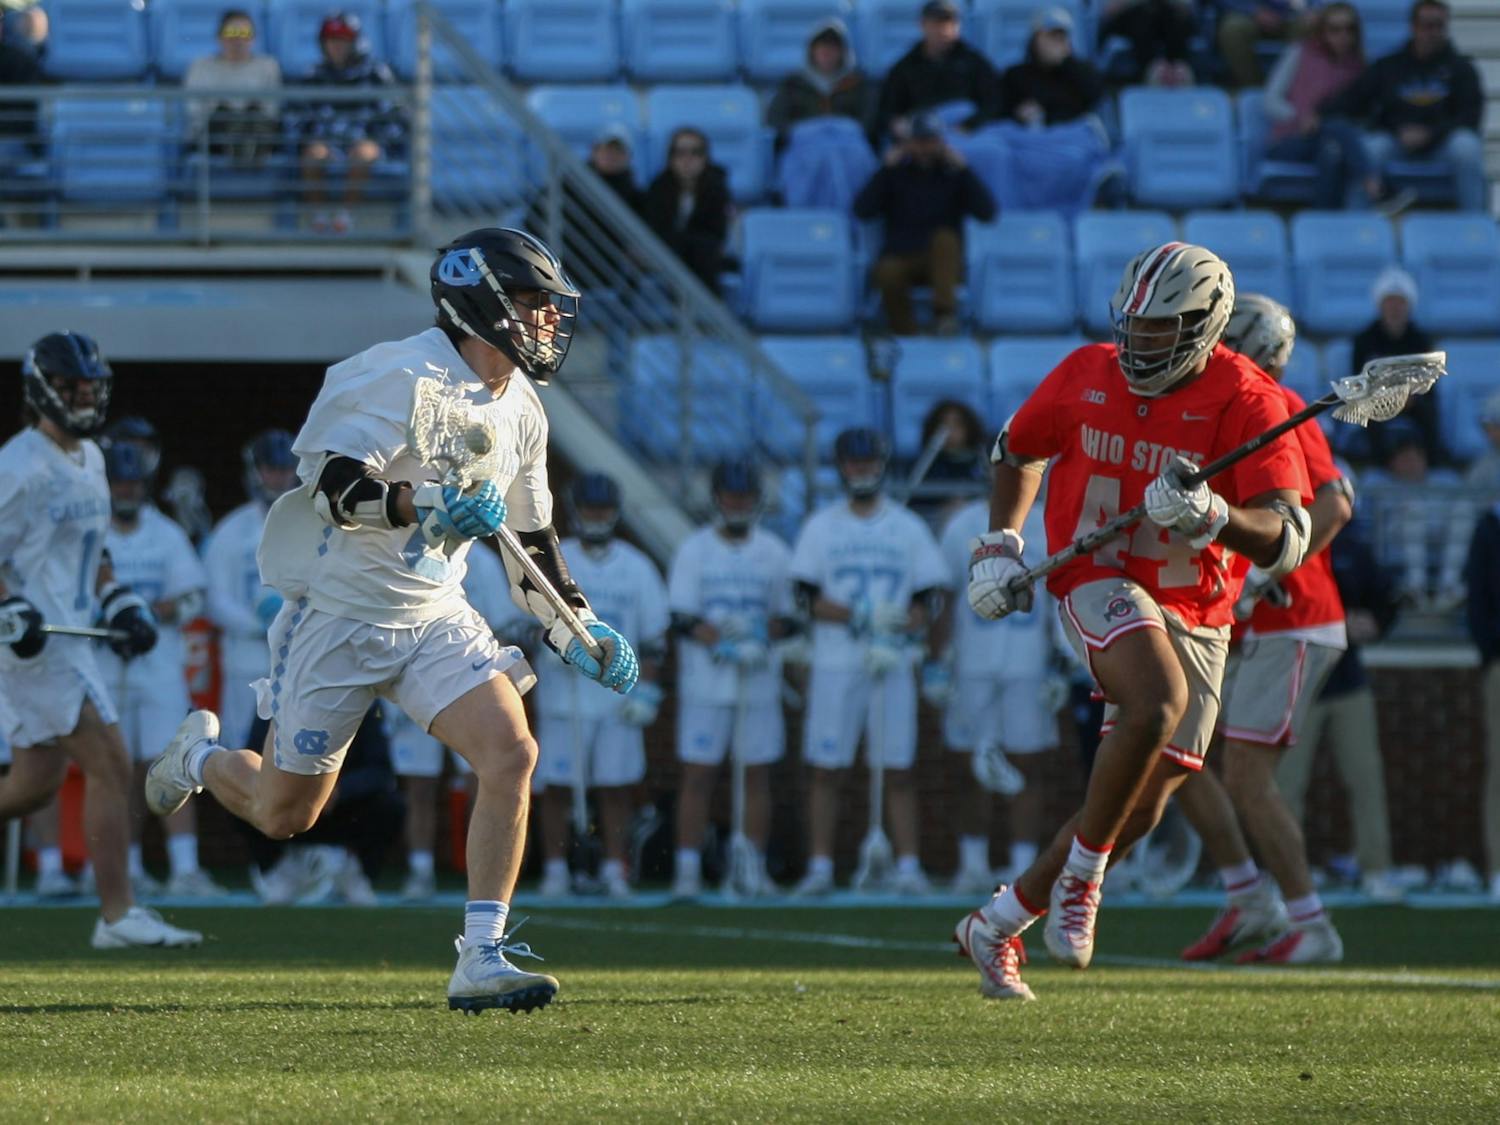 UNC junior attackman Lance Tillman (0) looks for an open run during a home men's lacrosse game against Ohio State on Saturday, Feb. 19, 2022. UNC lost 20-8.